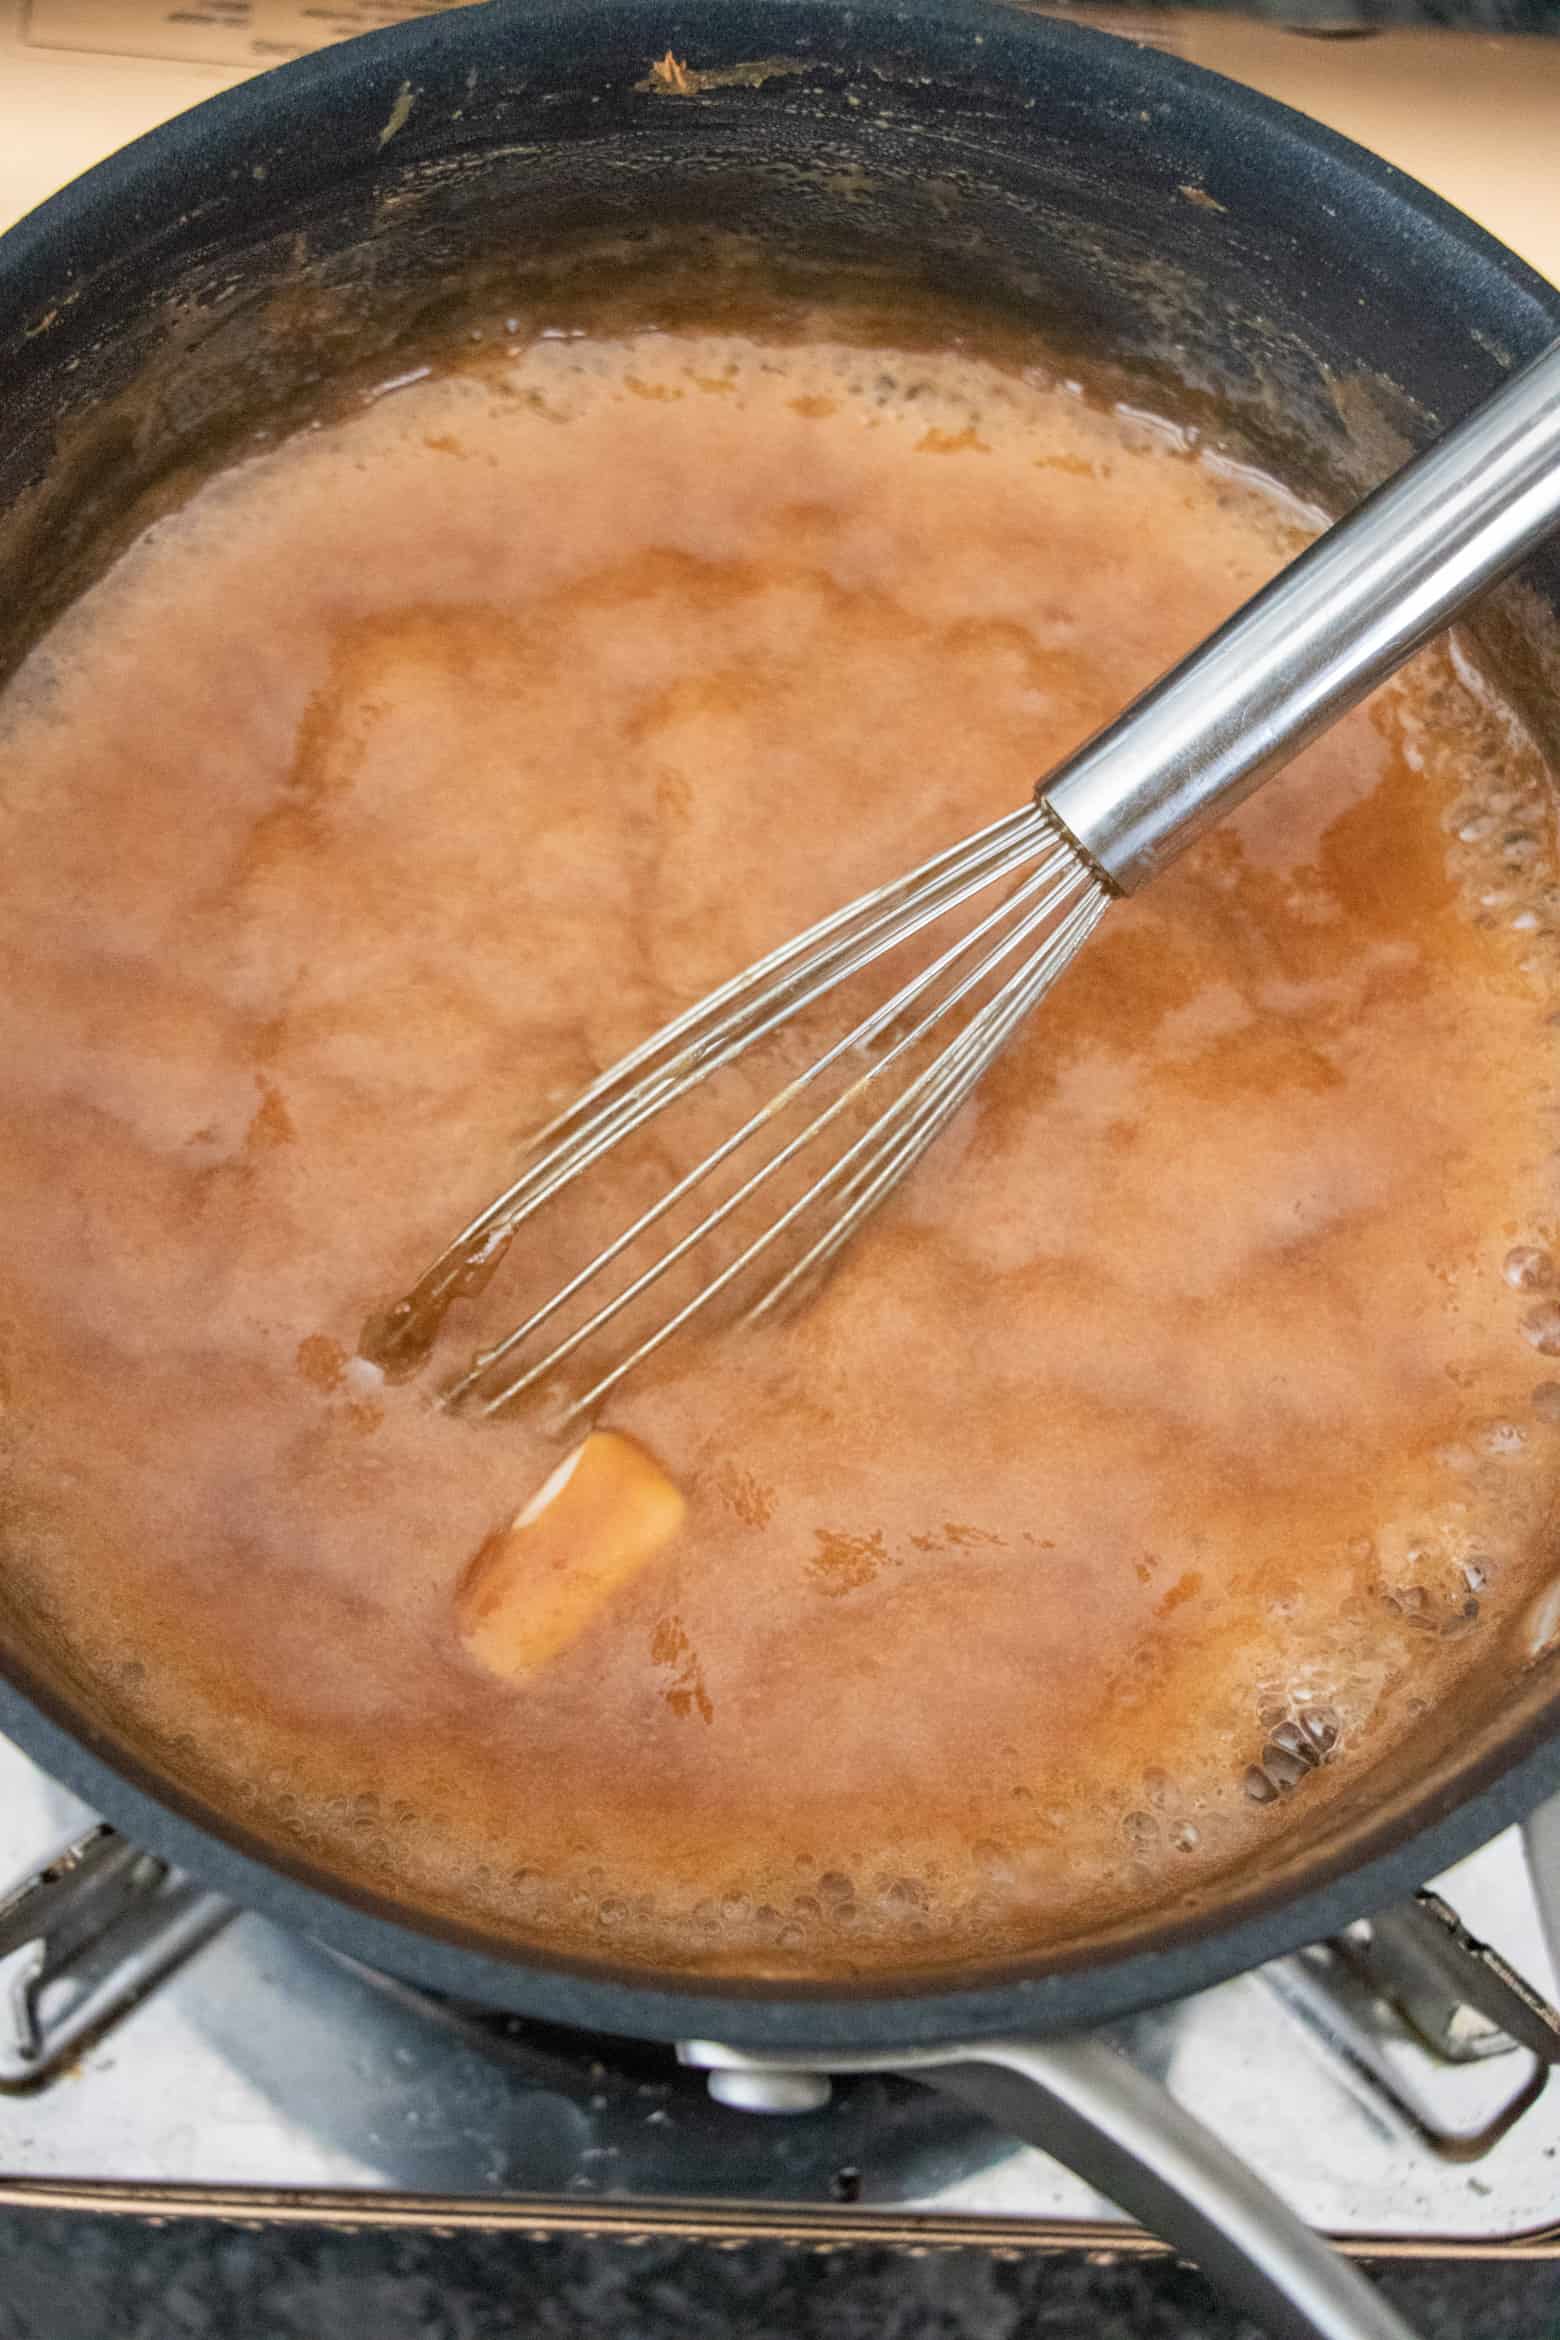 Butter being stirred into caramel sauce in a pot.